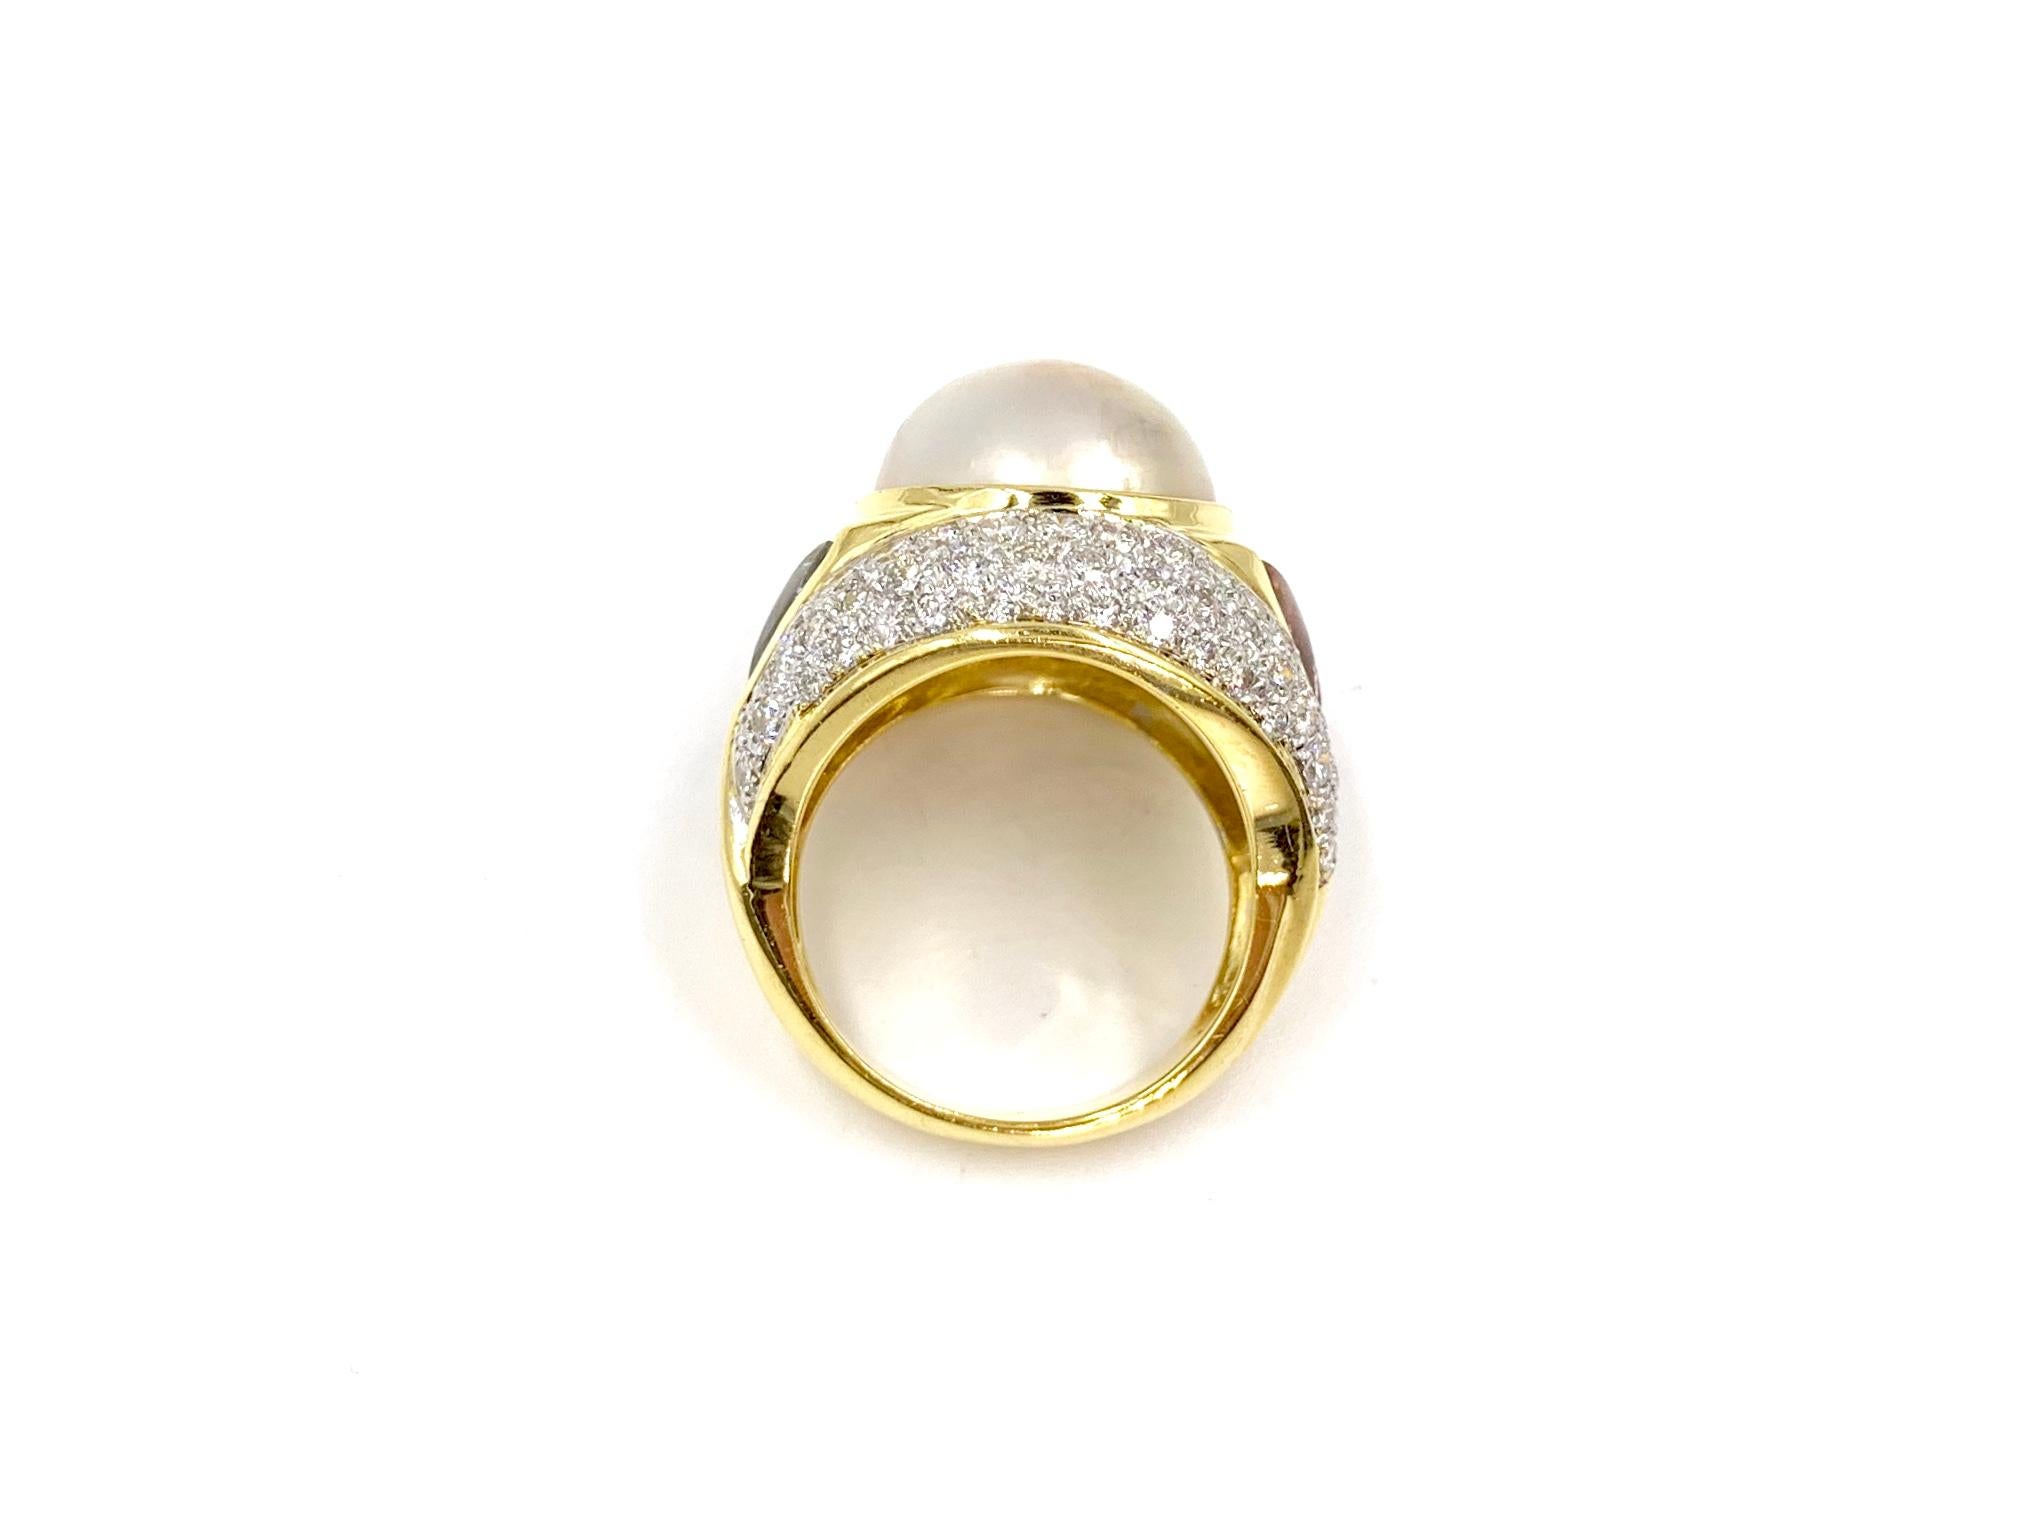 18 Karat Diamond, Pearl and Gemstone Cocktail Ring In Good Condition For Sale In Pikesville, MD